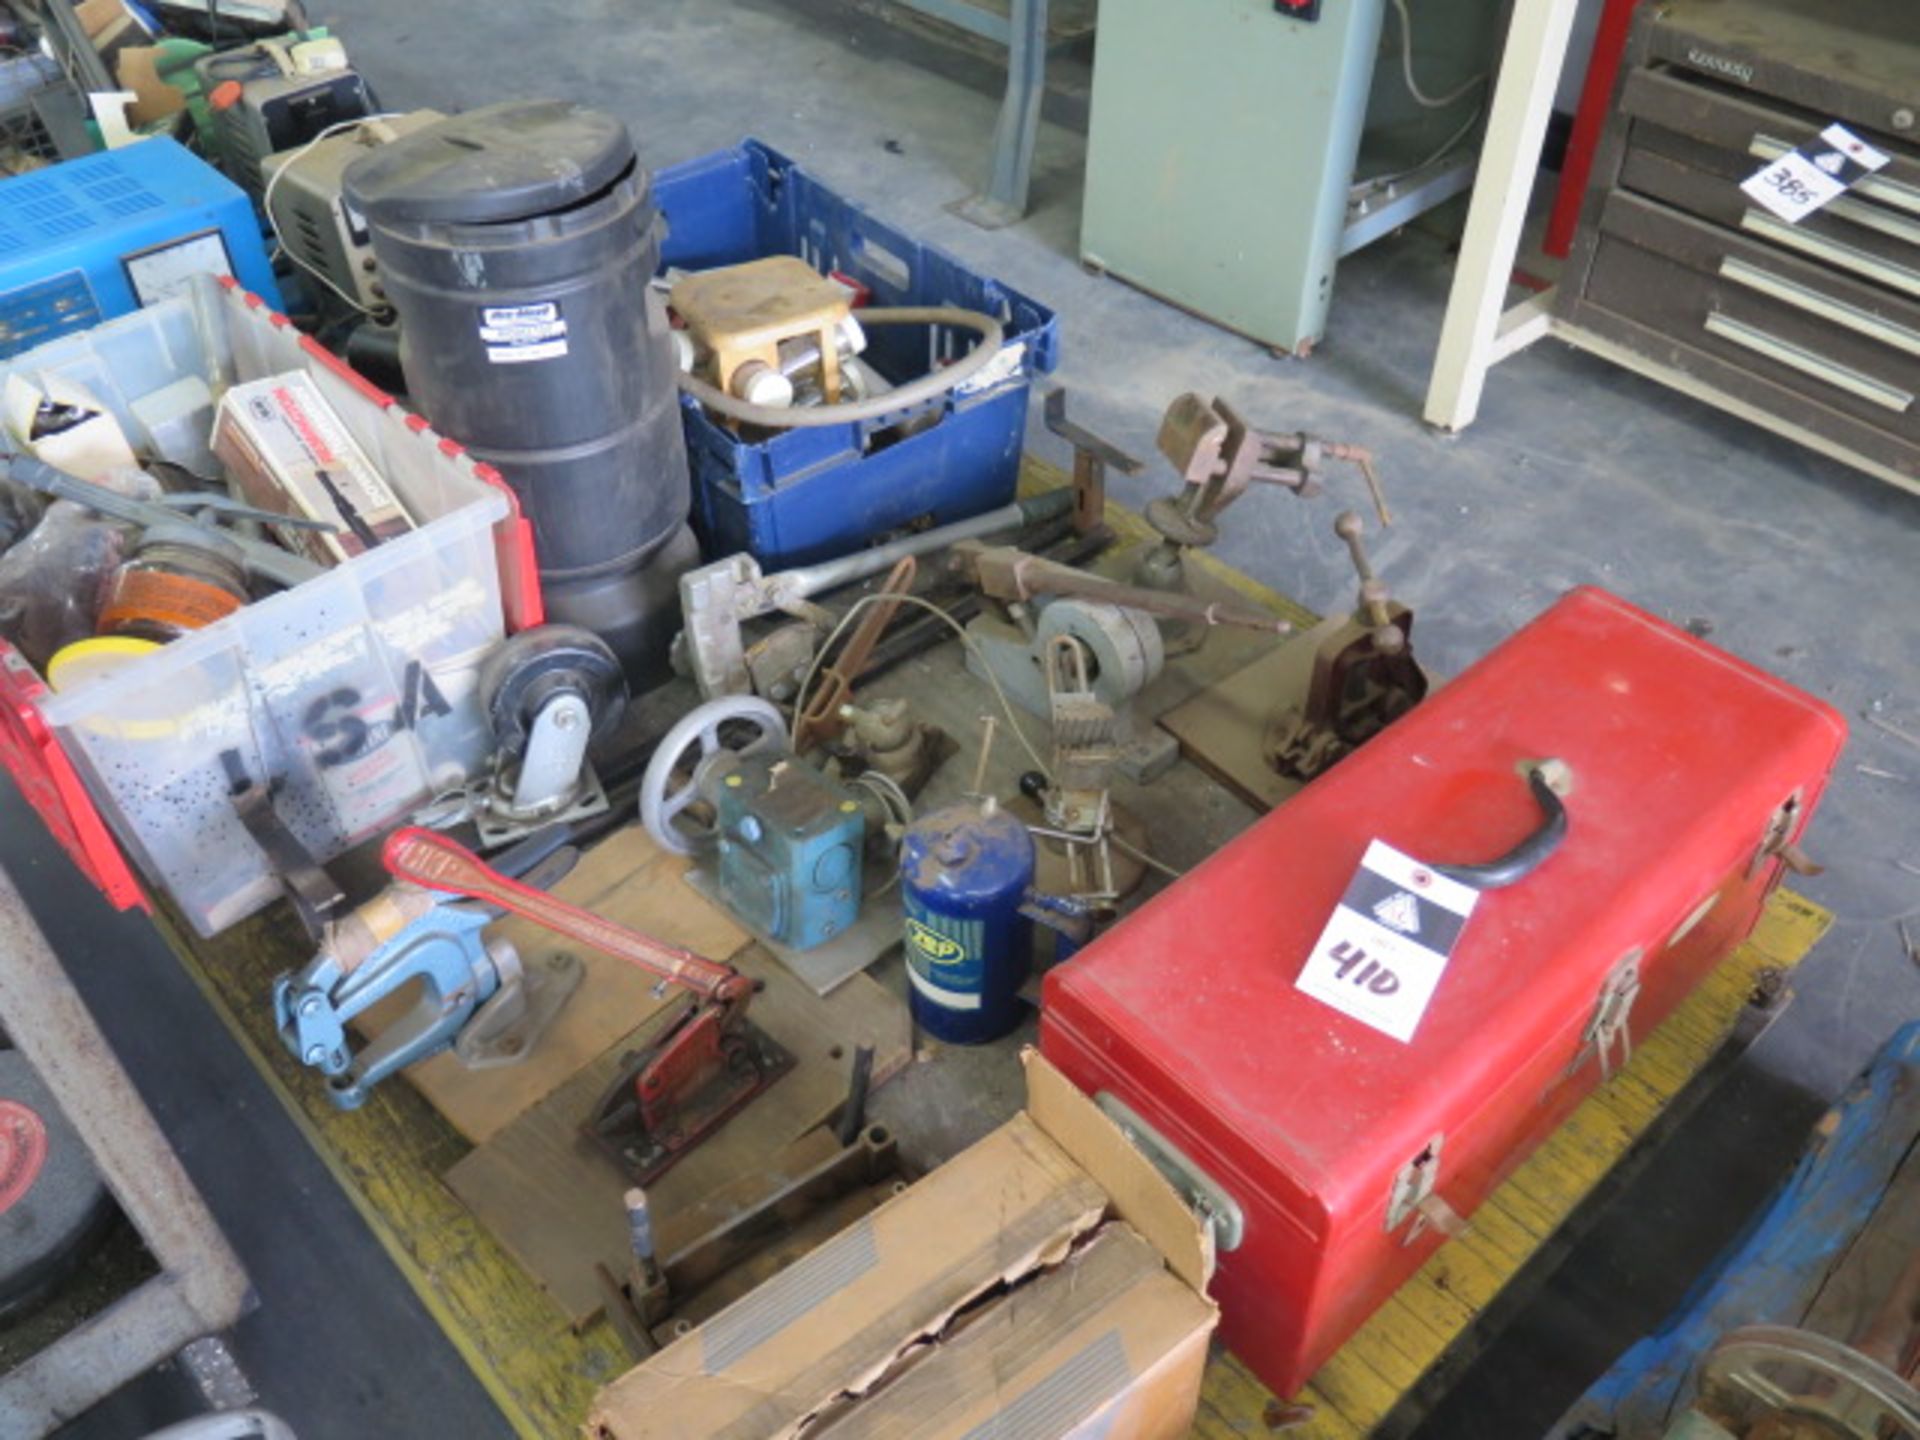 Misc Punches, Shears, benders, Tool Box, Grinding Wheels amd Misc (1-Pallet), SOLD AS IS